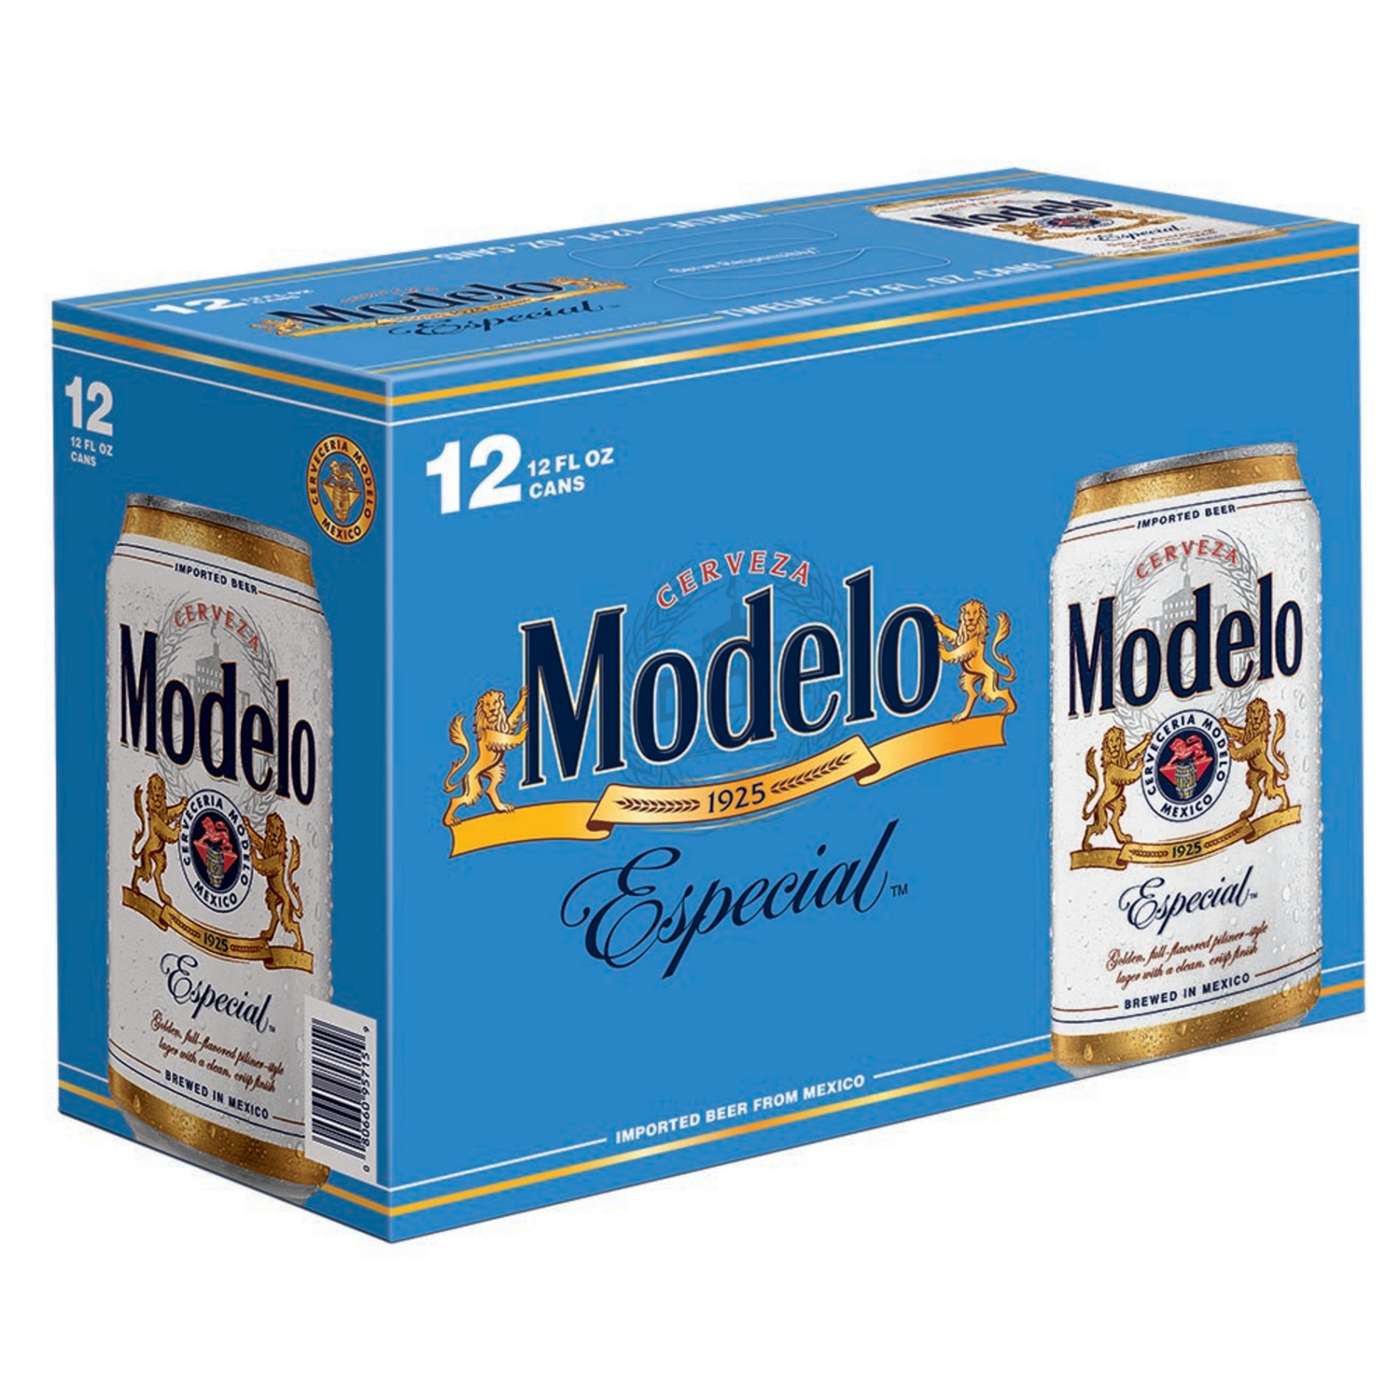 Modelo Especial Mexican Lager Import Beer 12 oz Cans, 12 pk; image 1 of 7